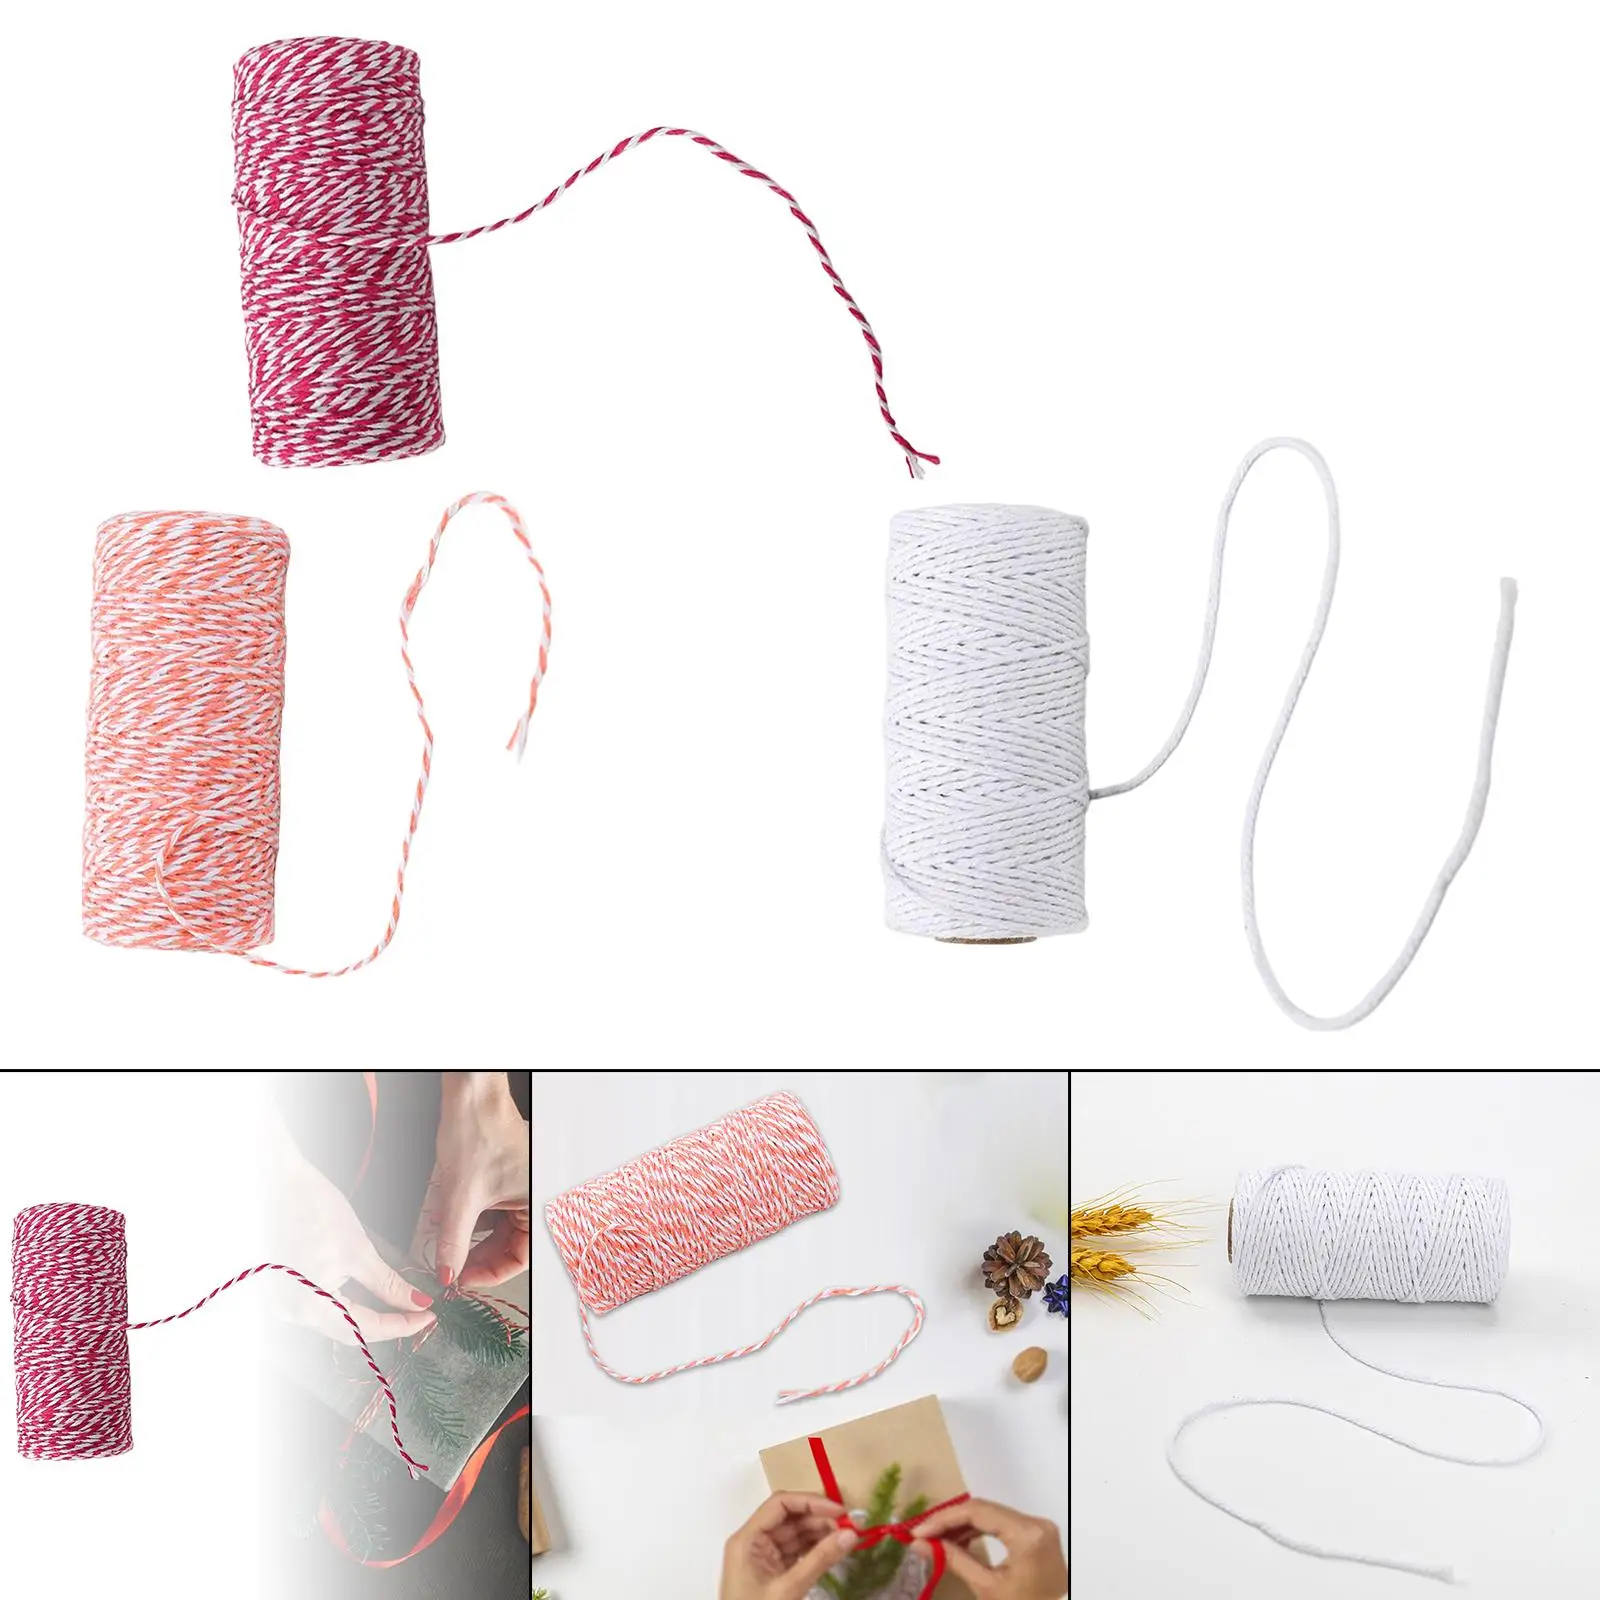 2mm Macrame Cord Rope Festive Twine Packing String for Home Sewing Embellishments Decor